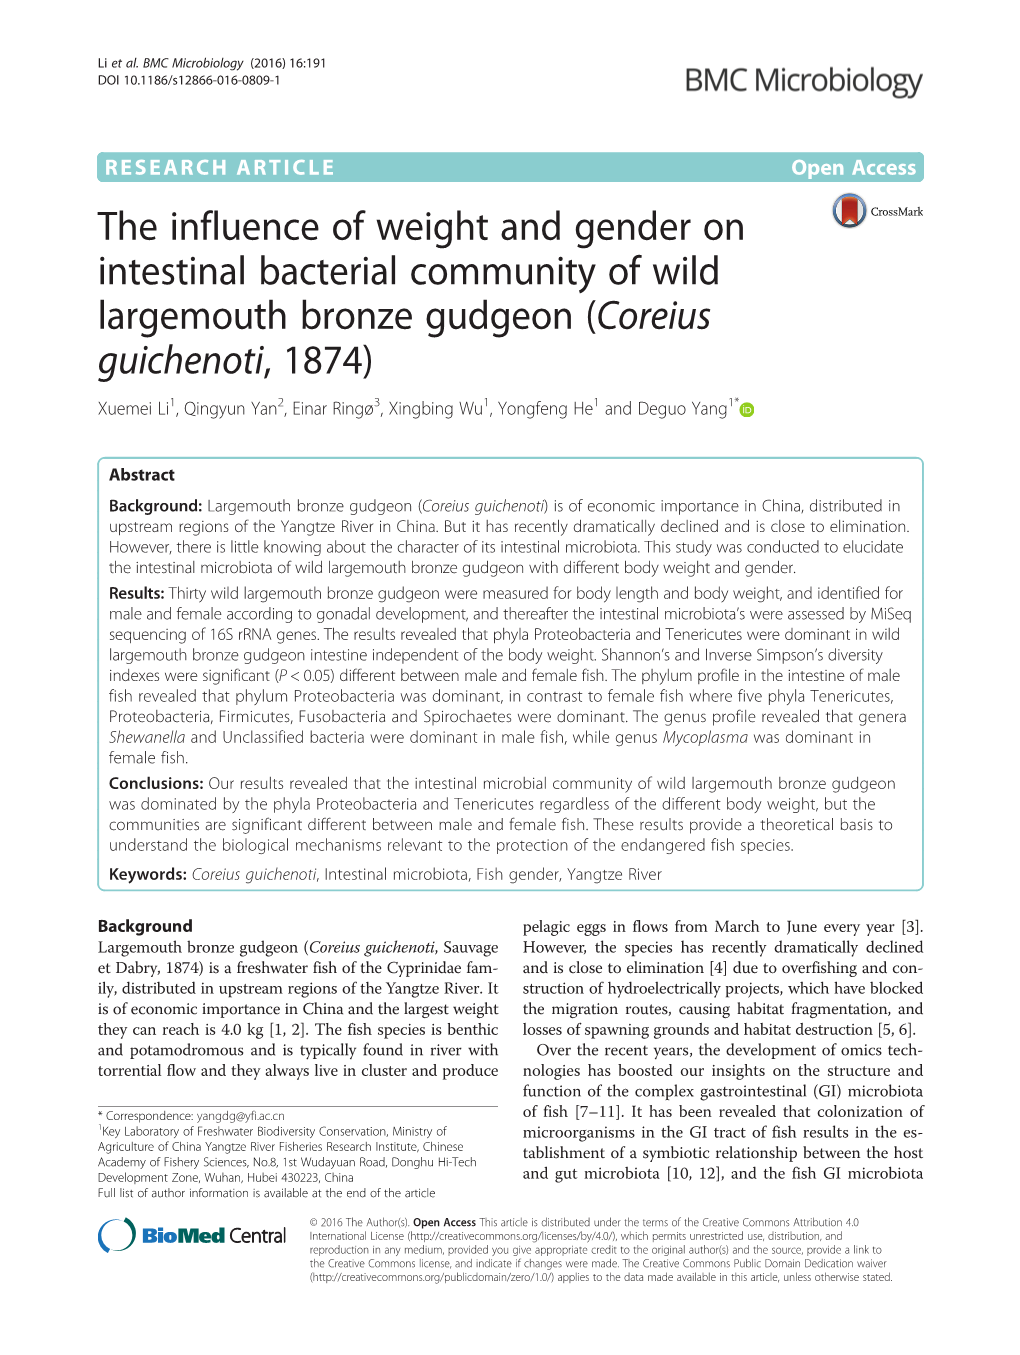 The Influence of Weight and Gender on Intestinal Bacterial Community of Wild Largemouth Bronze Gudgeon (Coreius Guichenoti, 1874